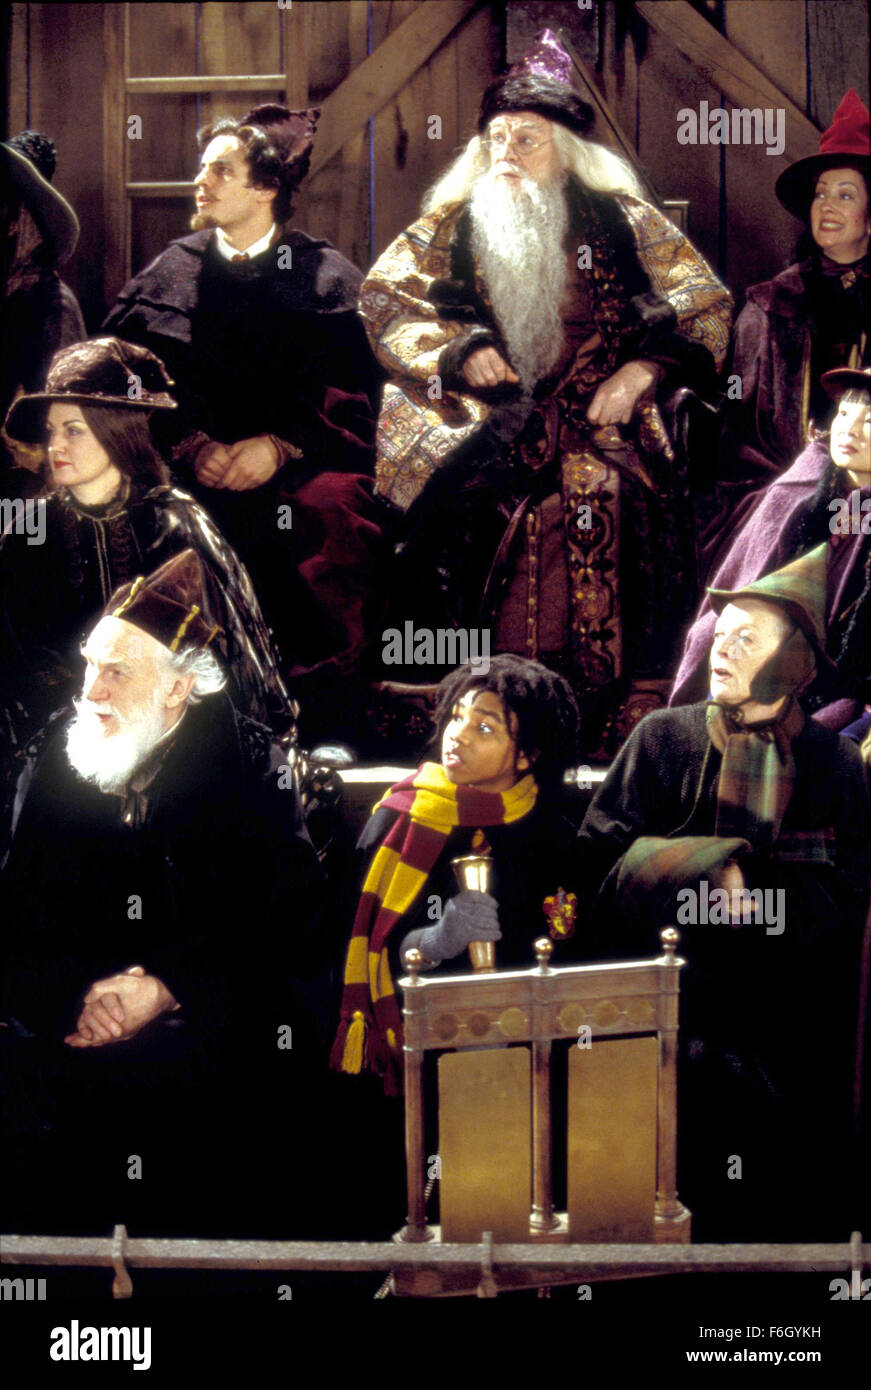 Harry potter merchandising hi-res stock photography and images - Alamy